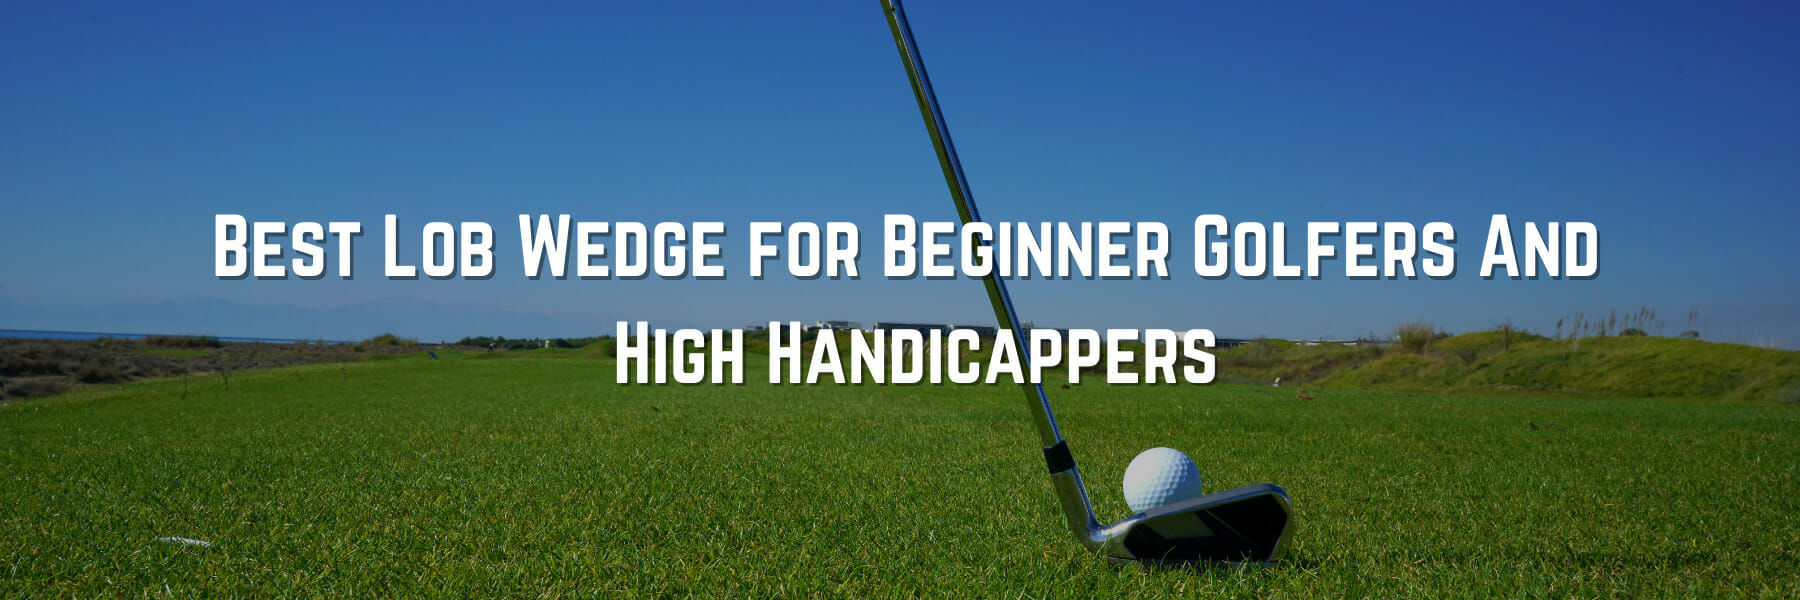 Best Lob Wedge for Beginner Golfers And High Handicappers